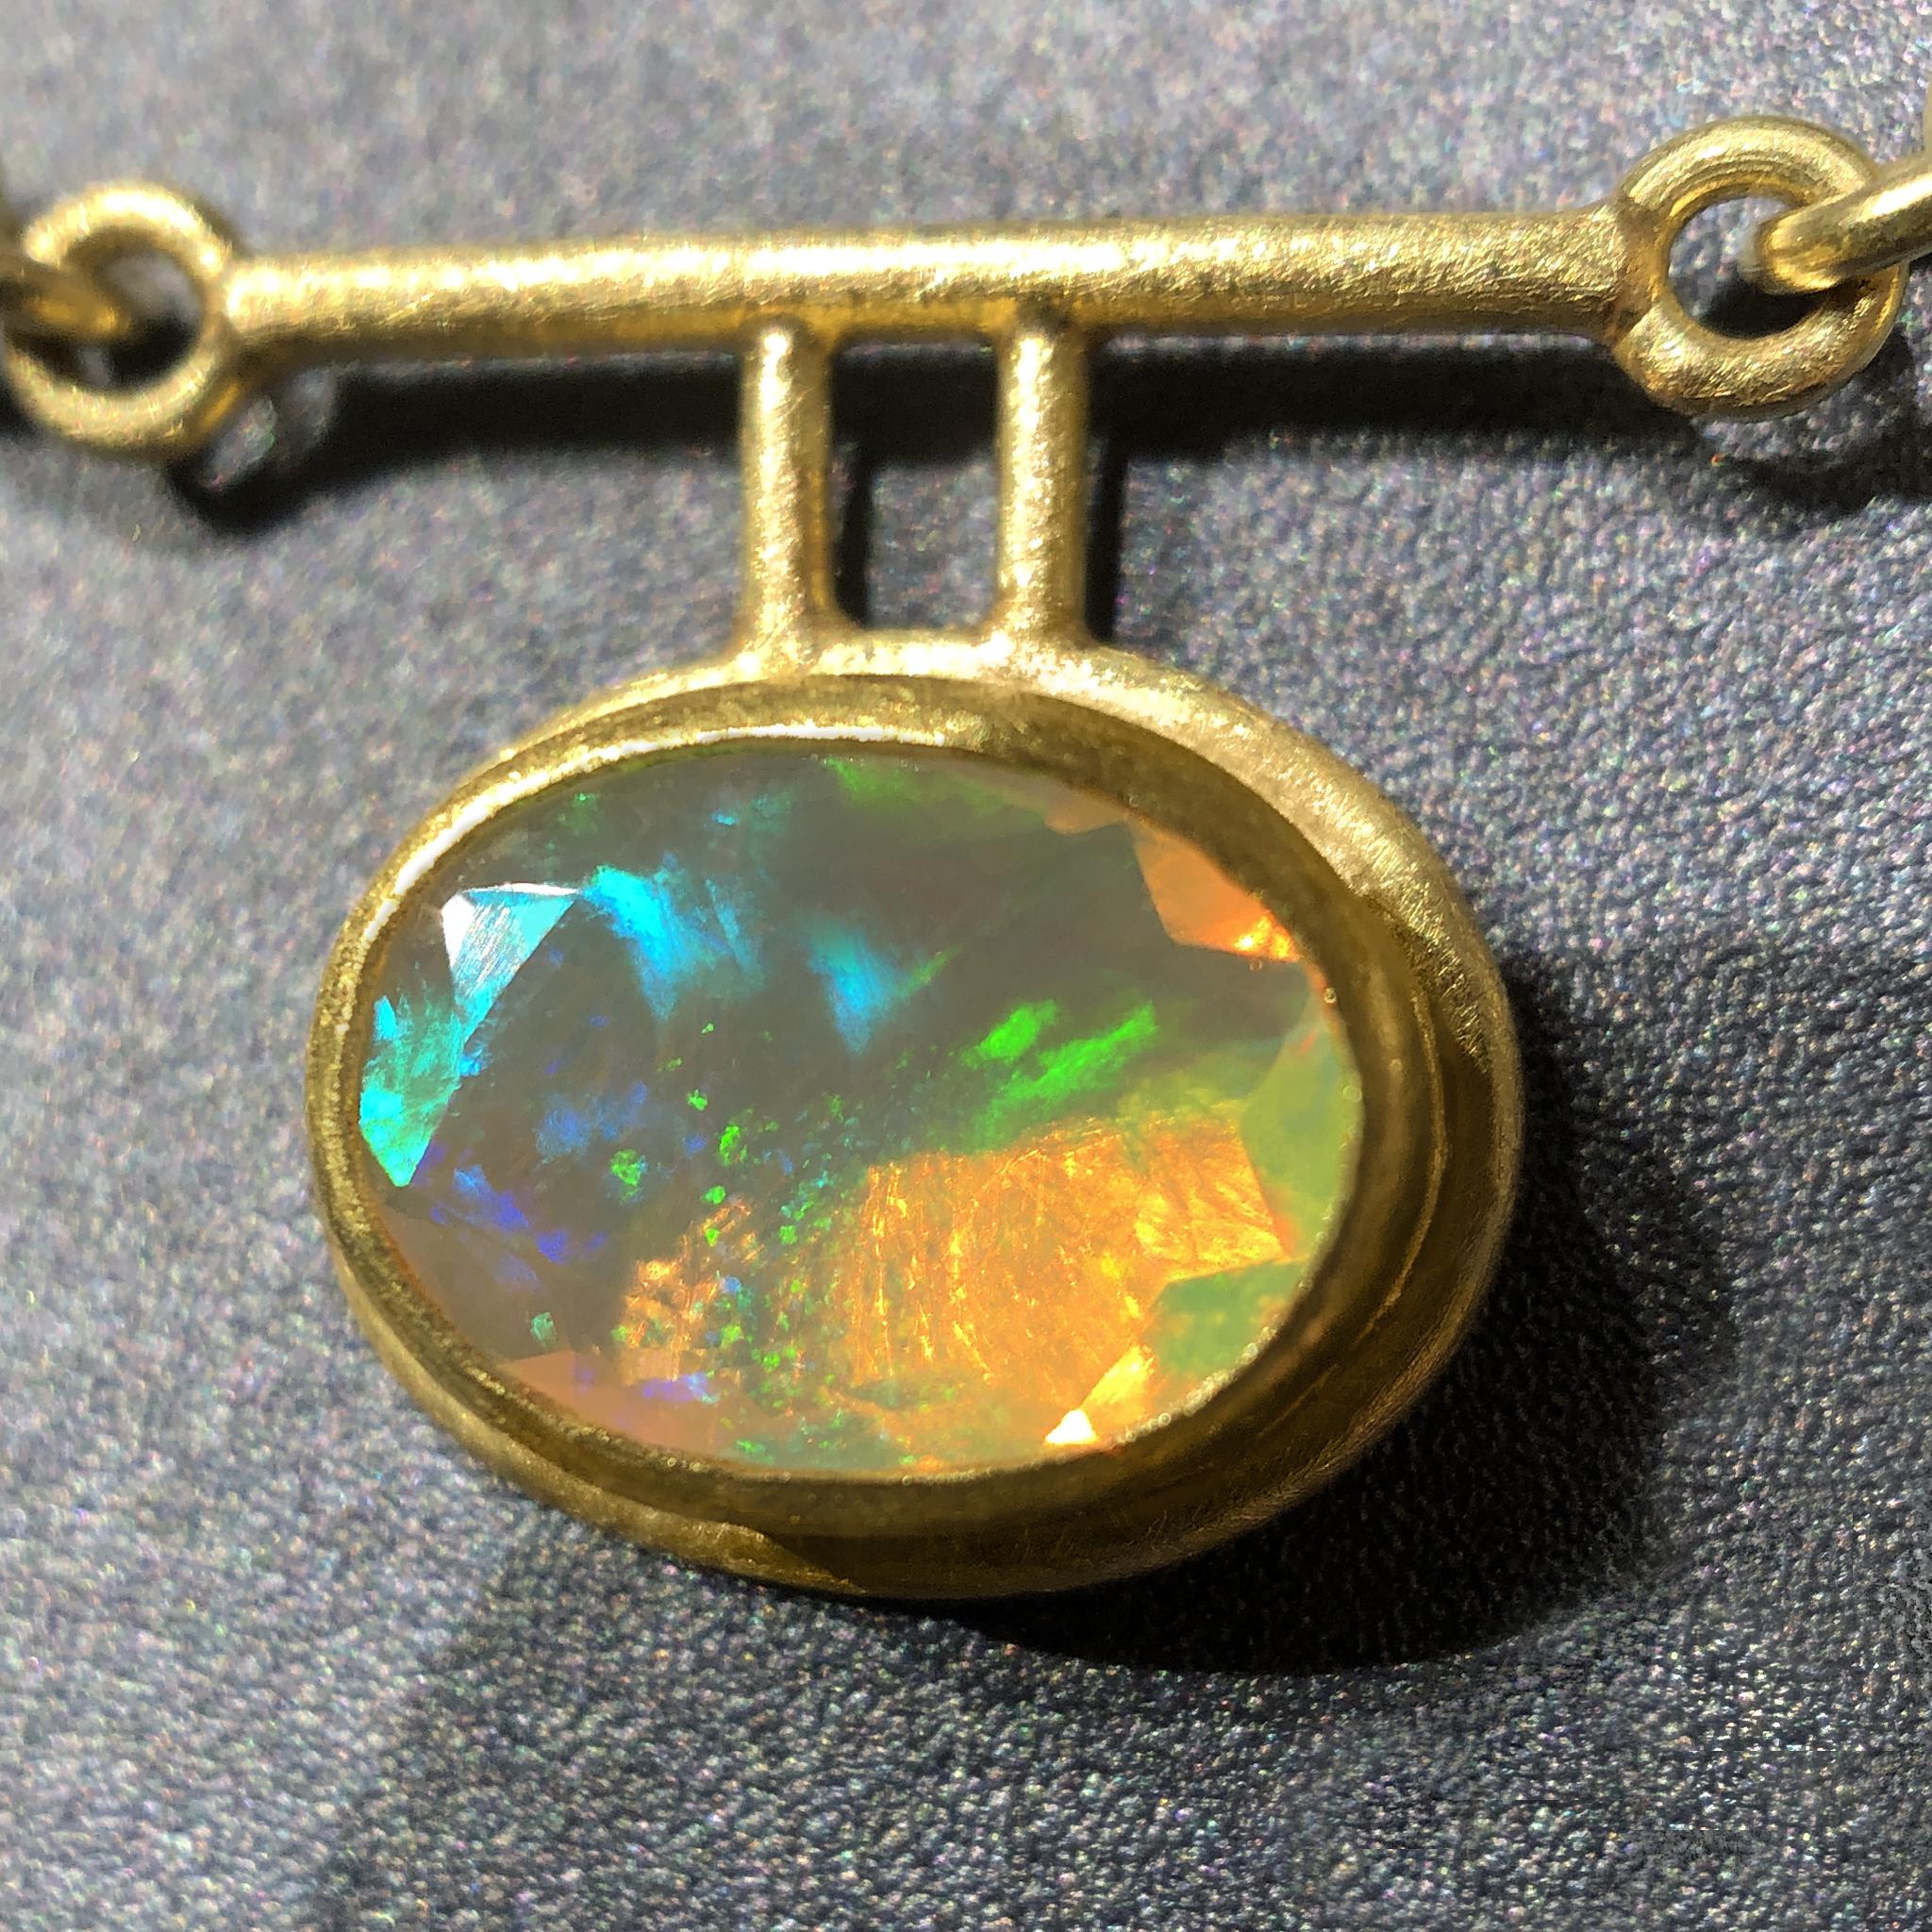 Oval Cut Petra Class Fiery Faceted Ethiopian Opal One-of-a-Kind Double Segment Necklace